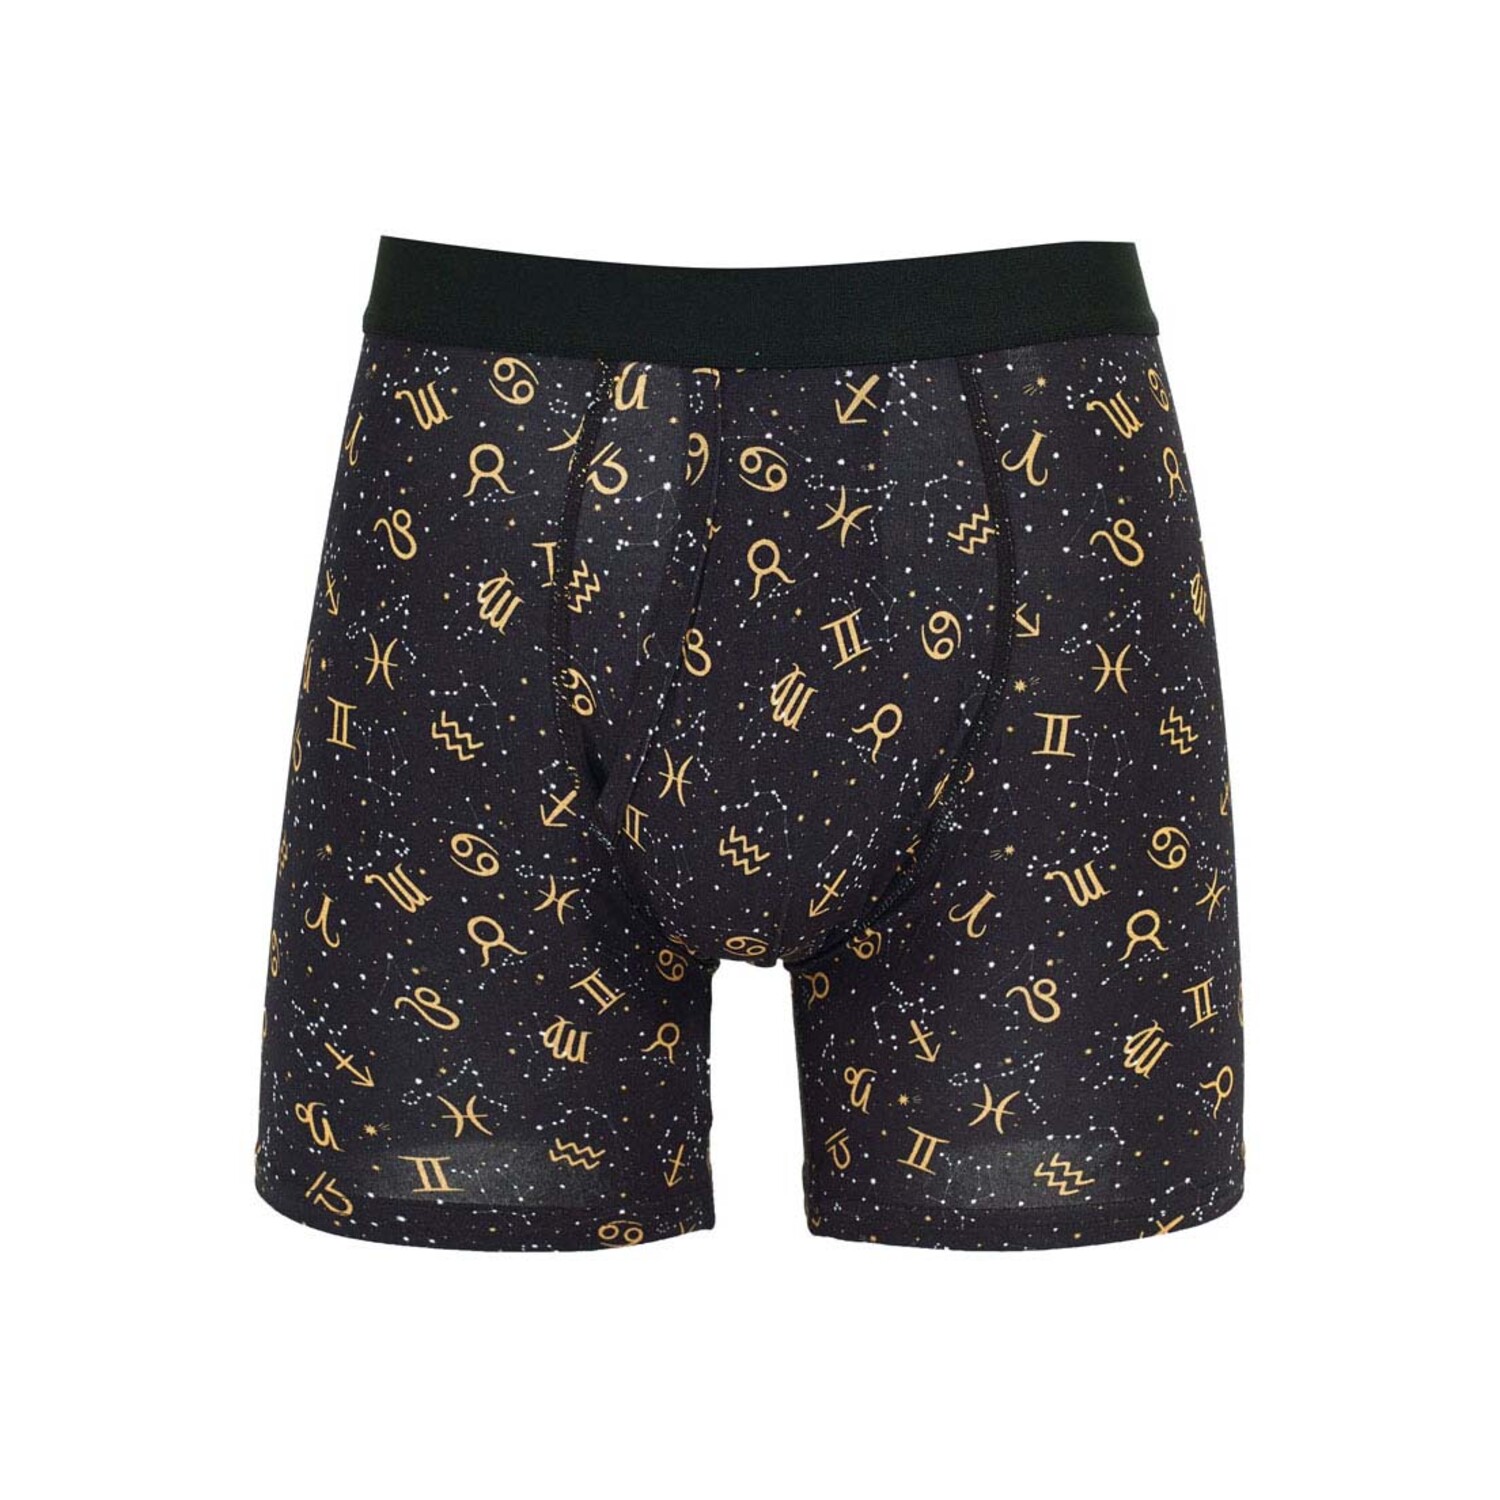 Sign Softer Than Cotton Boxer Brief // Black (S) - Warriors